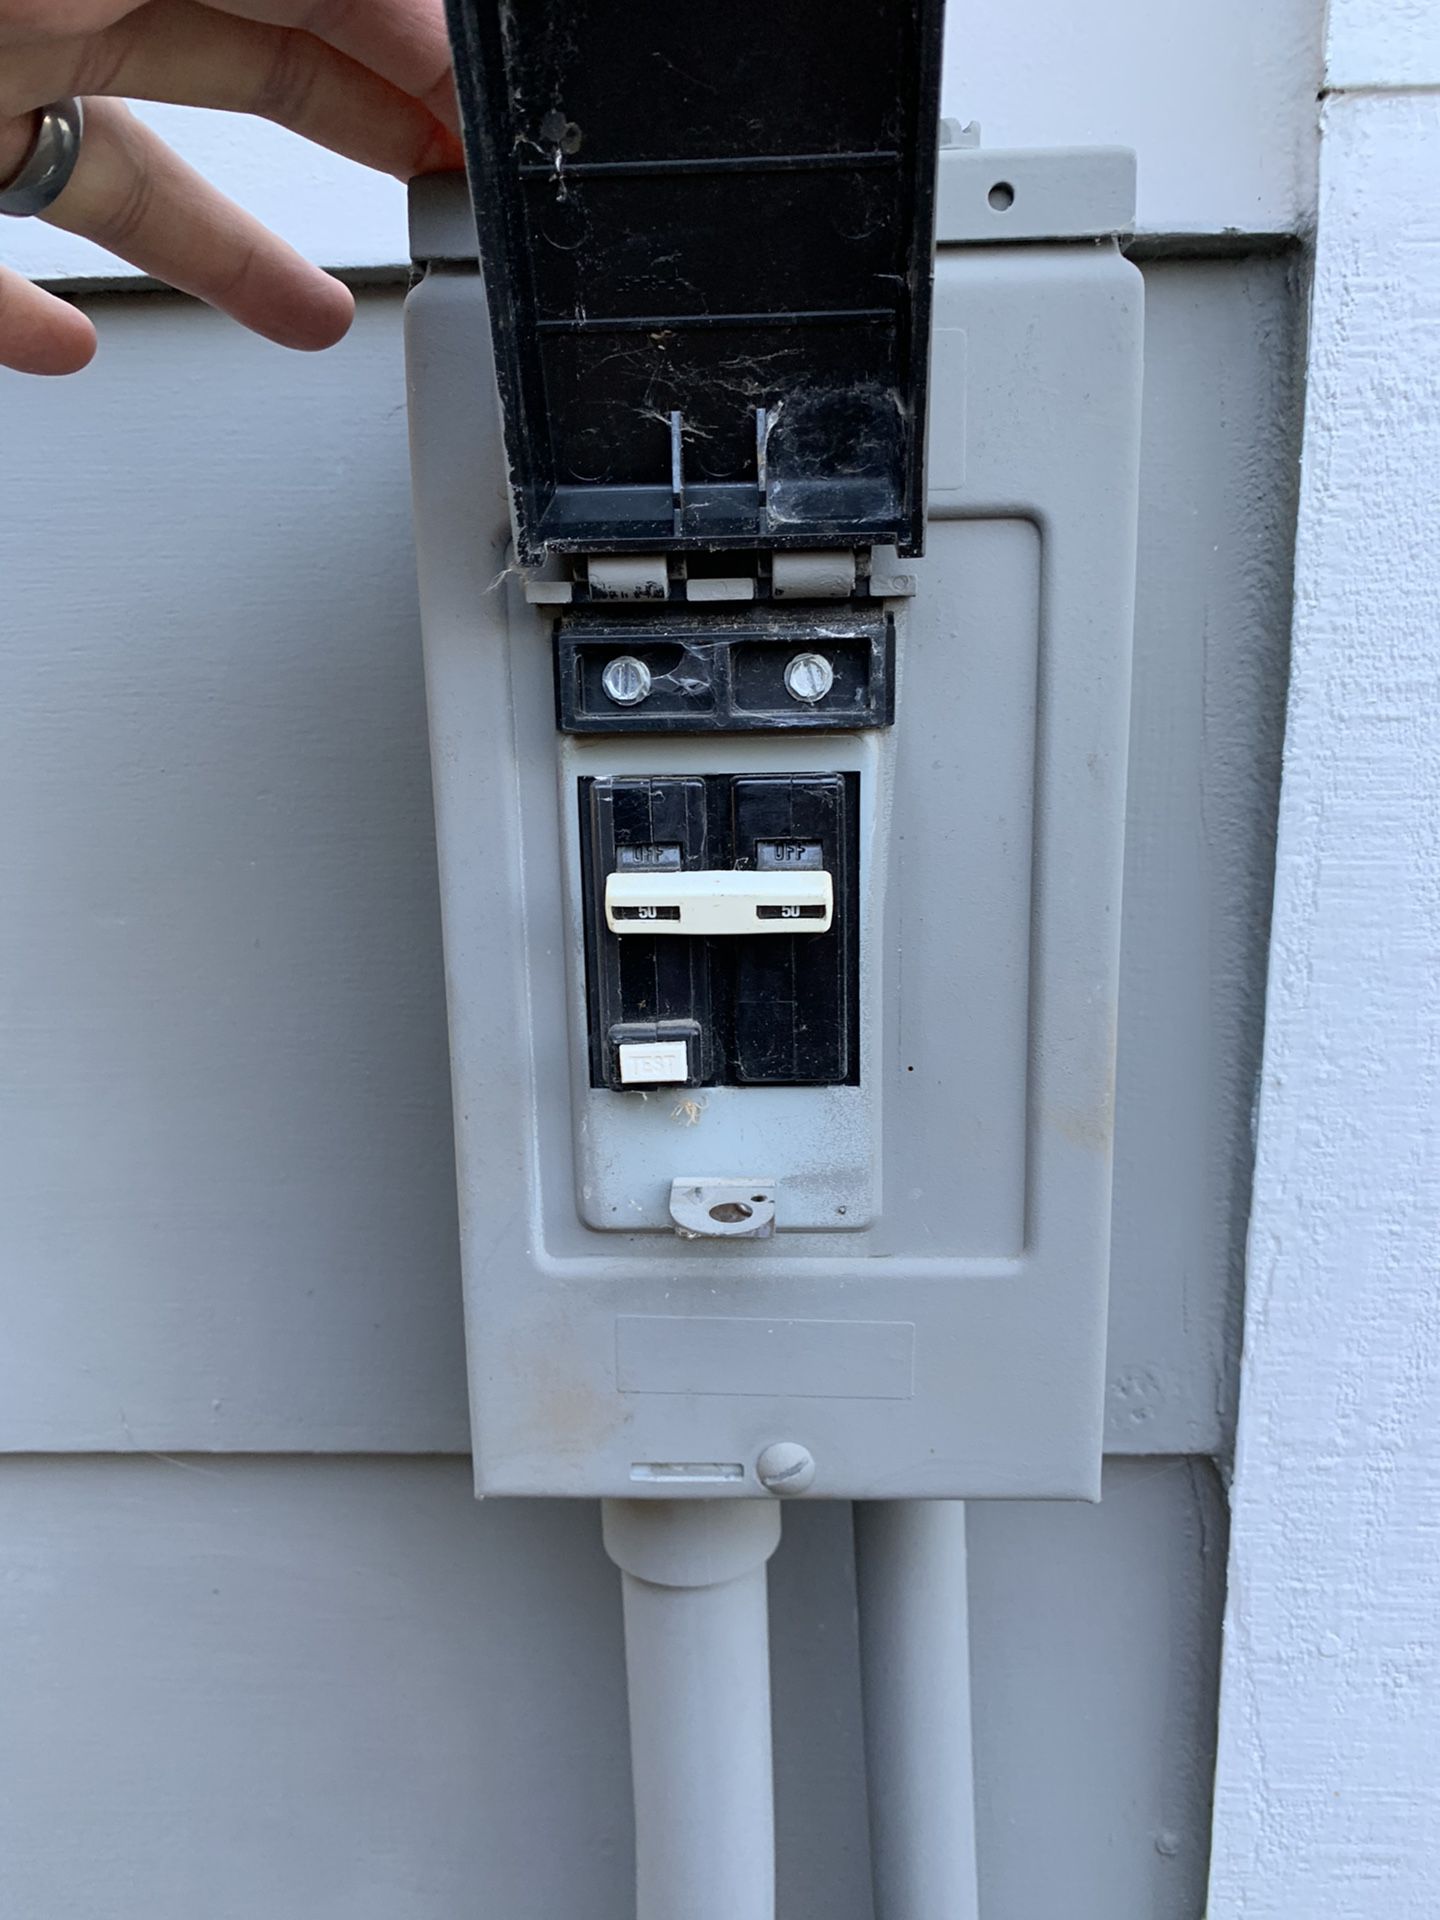 Hot tub breaker box and electrical connections